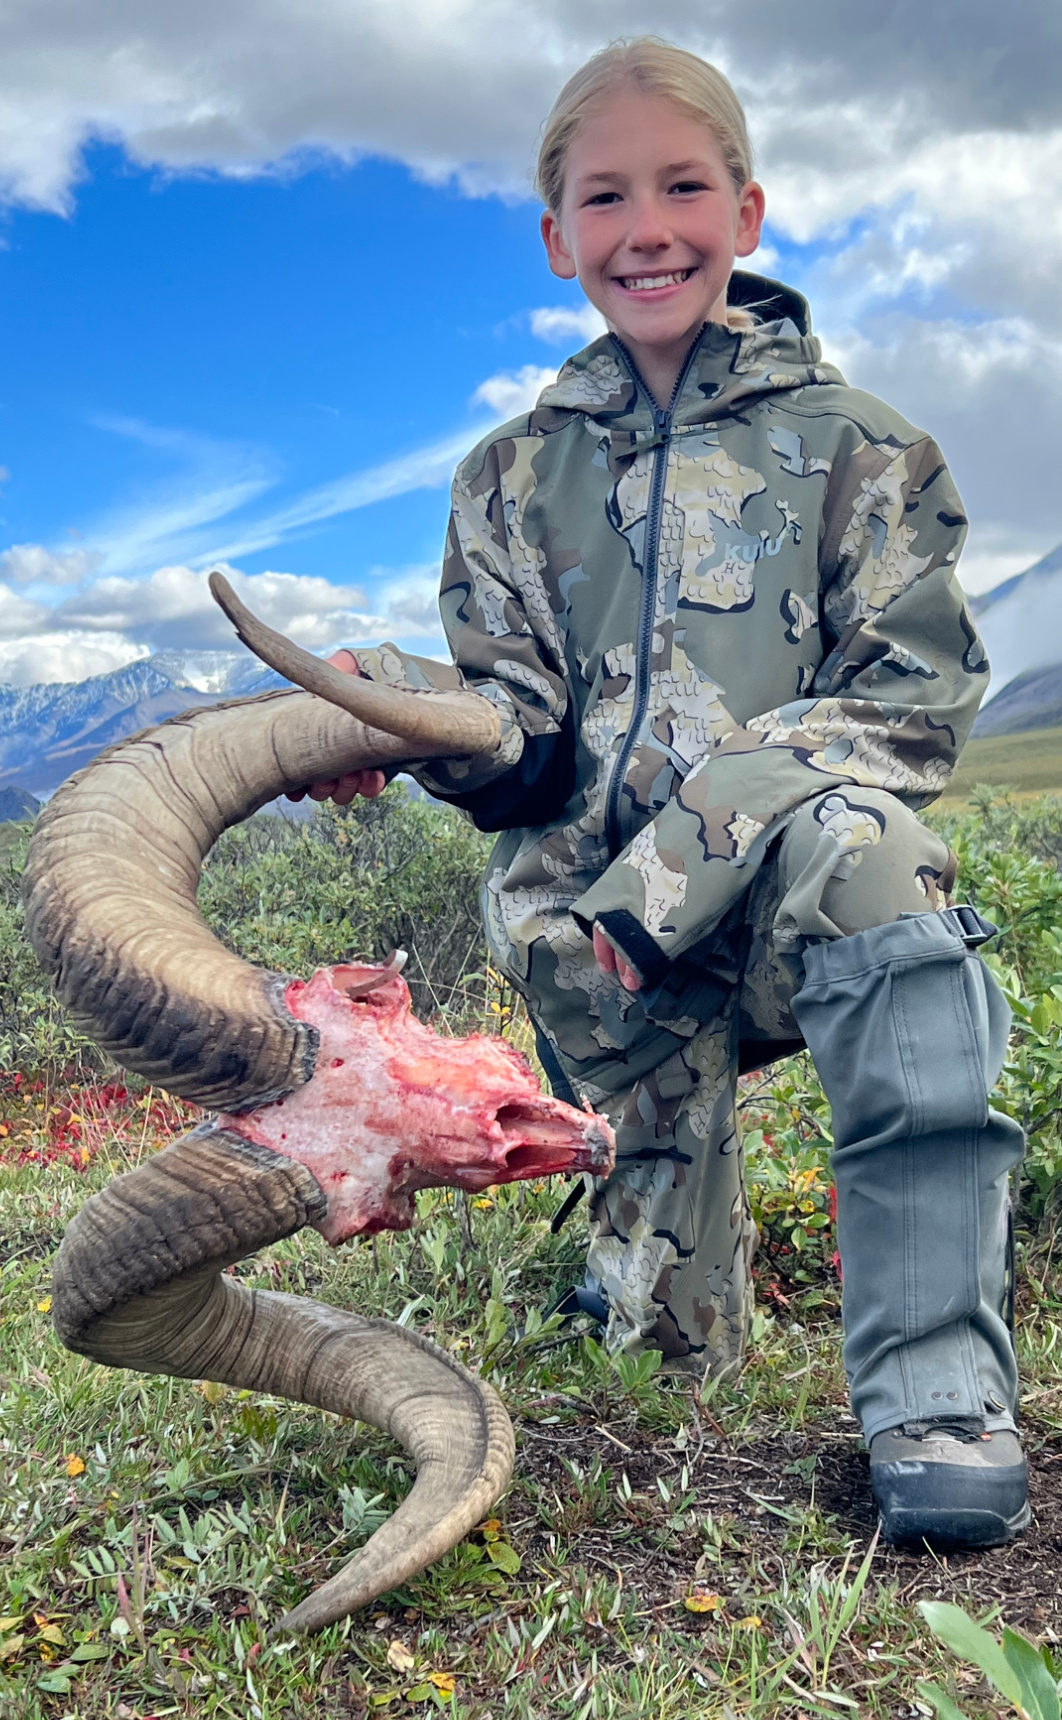 13-Year-Old Texas Girl Becomes Youngest Female Hunter to Complete North American Sheep Grand Slam